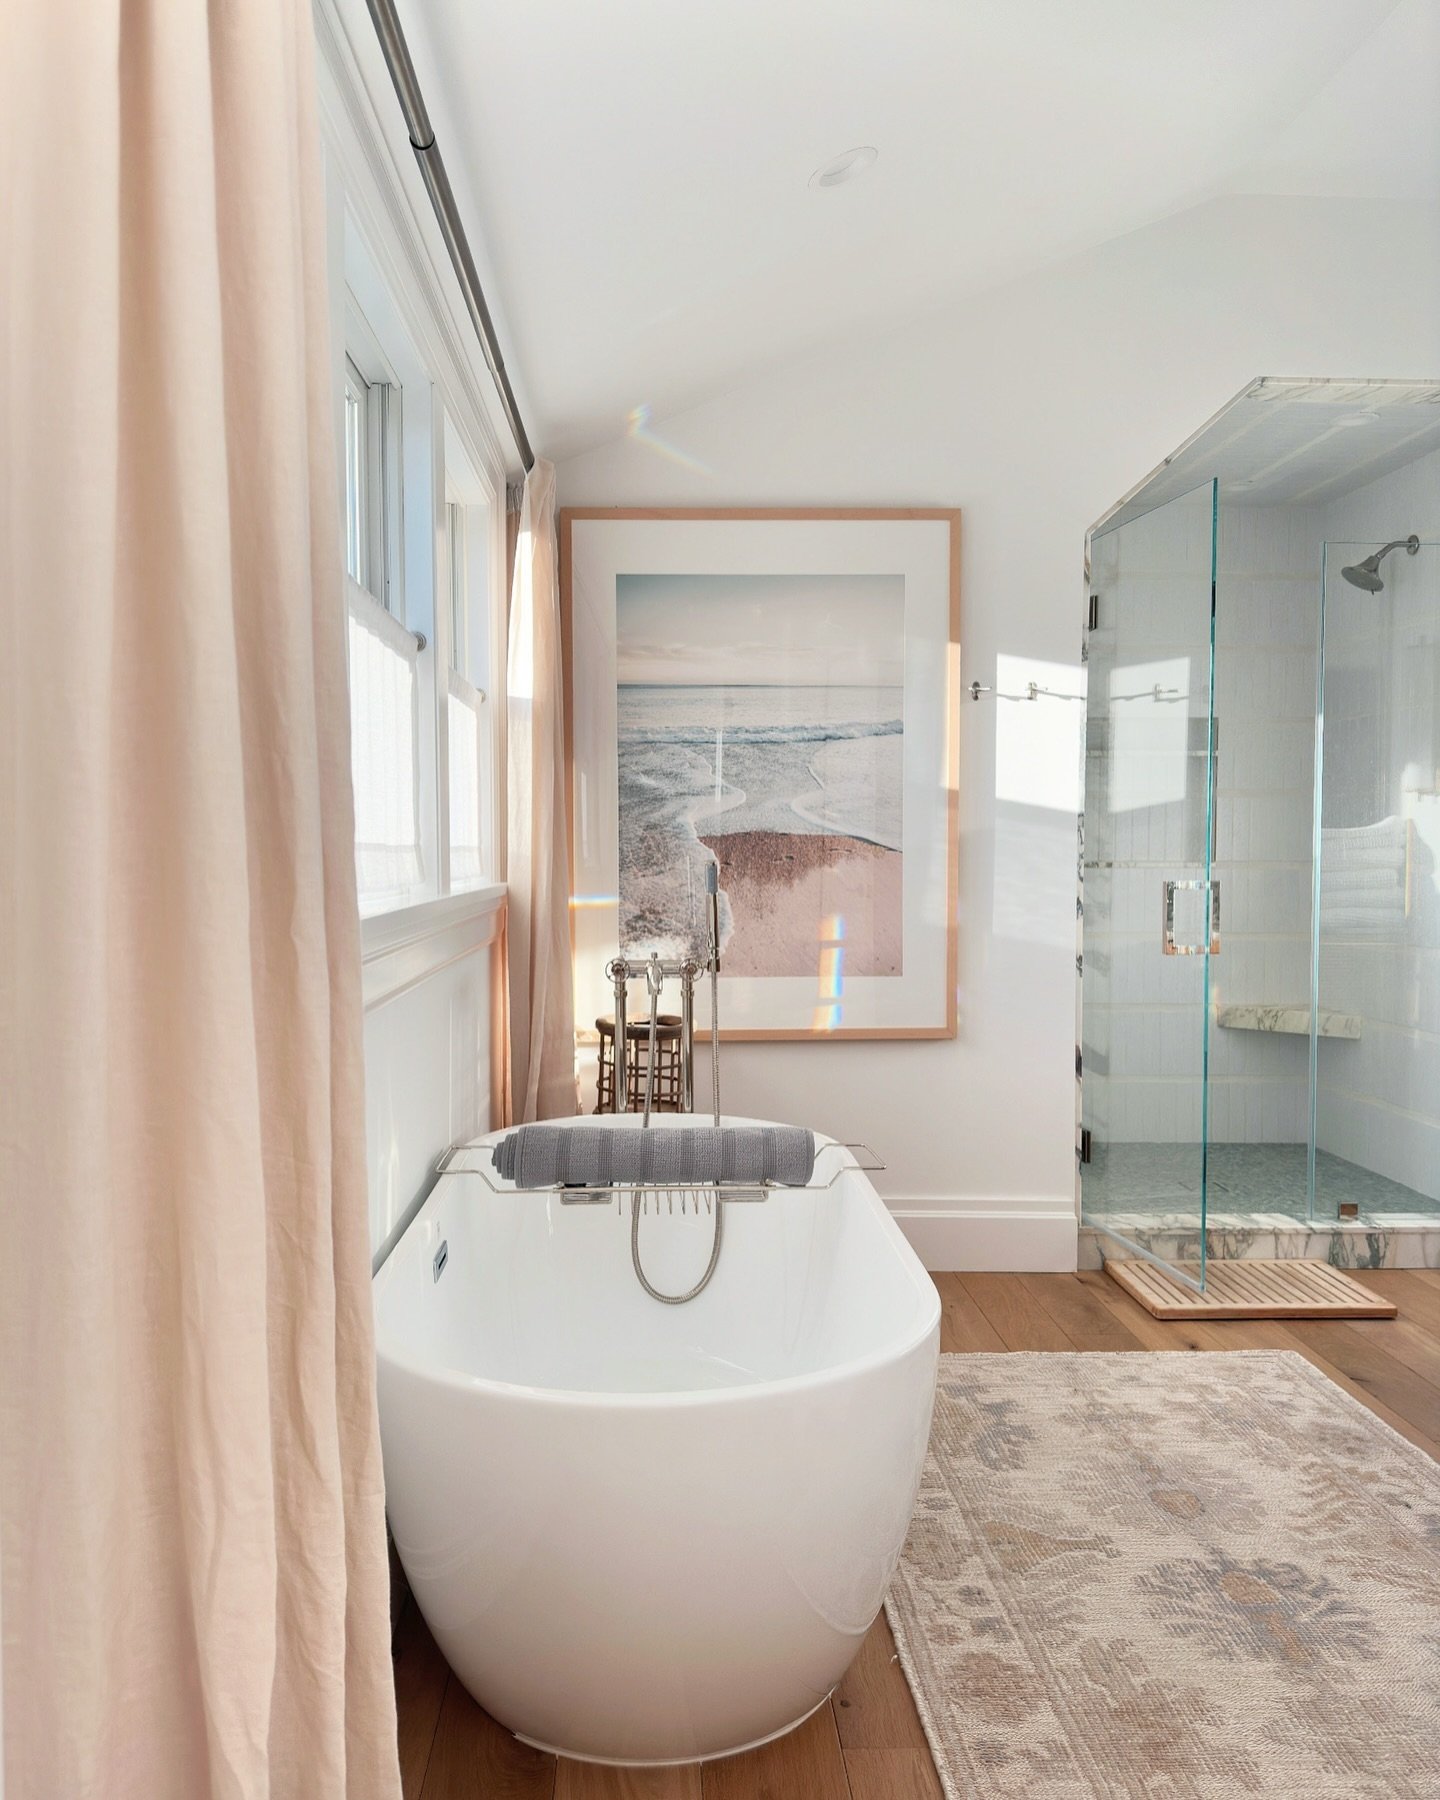 love designing bathrooms 🌊 feeling inspired after a great client meeting 🛁 looking forward
to starting this new project 🪩

#interiordesigninspiration #interiordesign #interiorinspiration #hamptons #hamptonsstyle #bathroomdesign #bathroom #bathroom